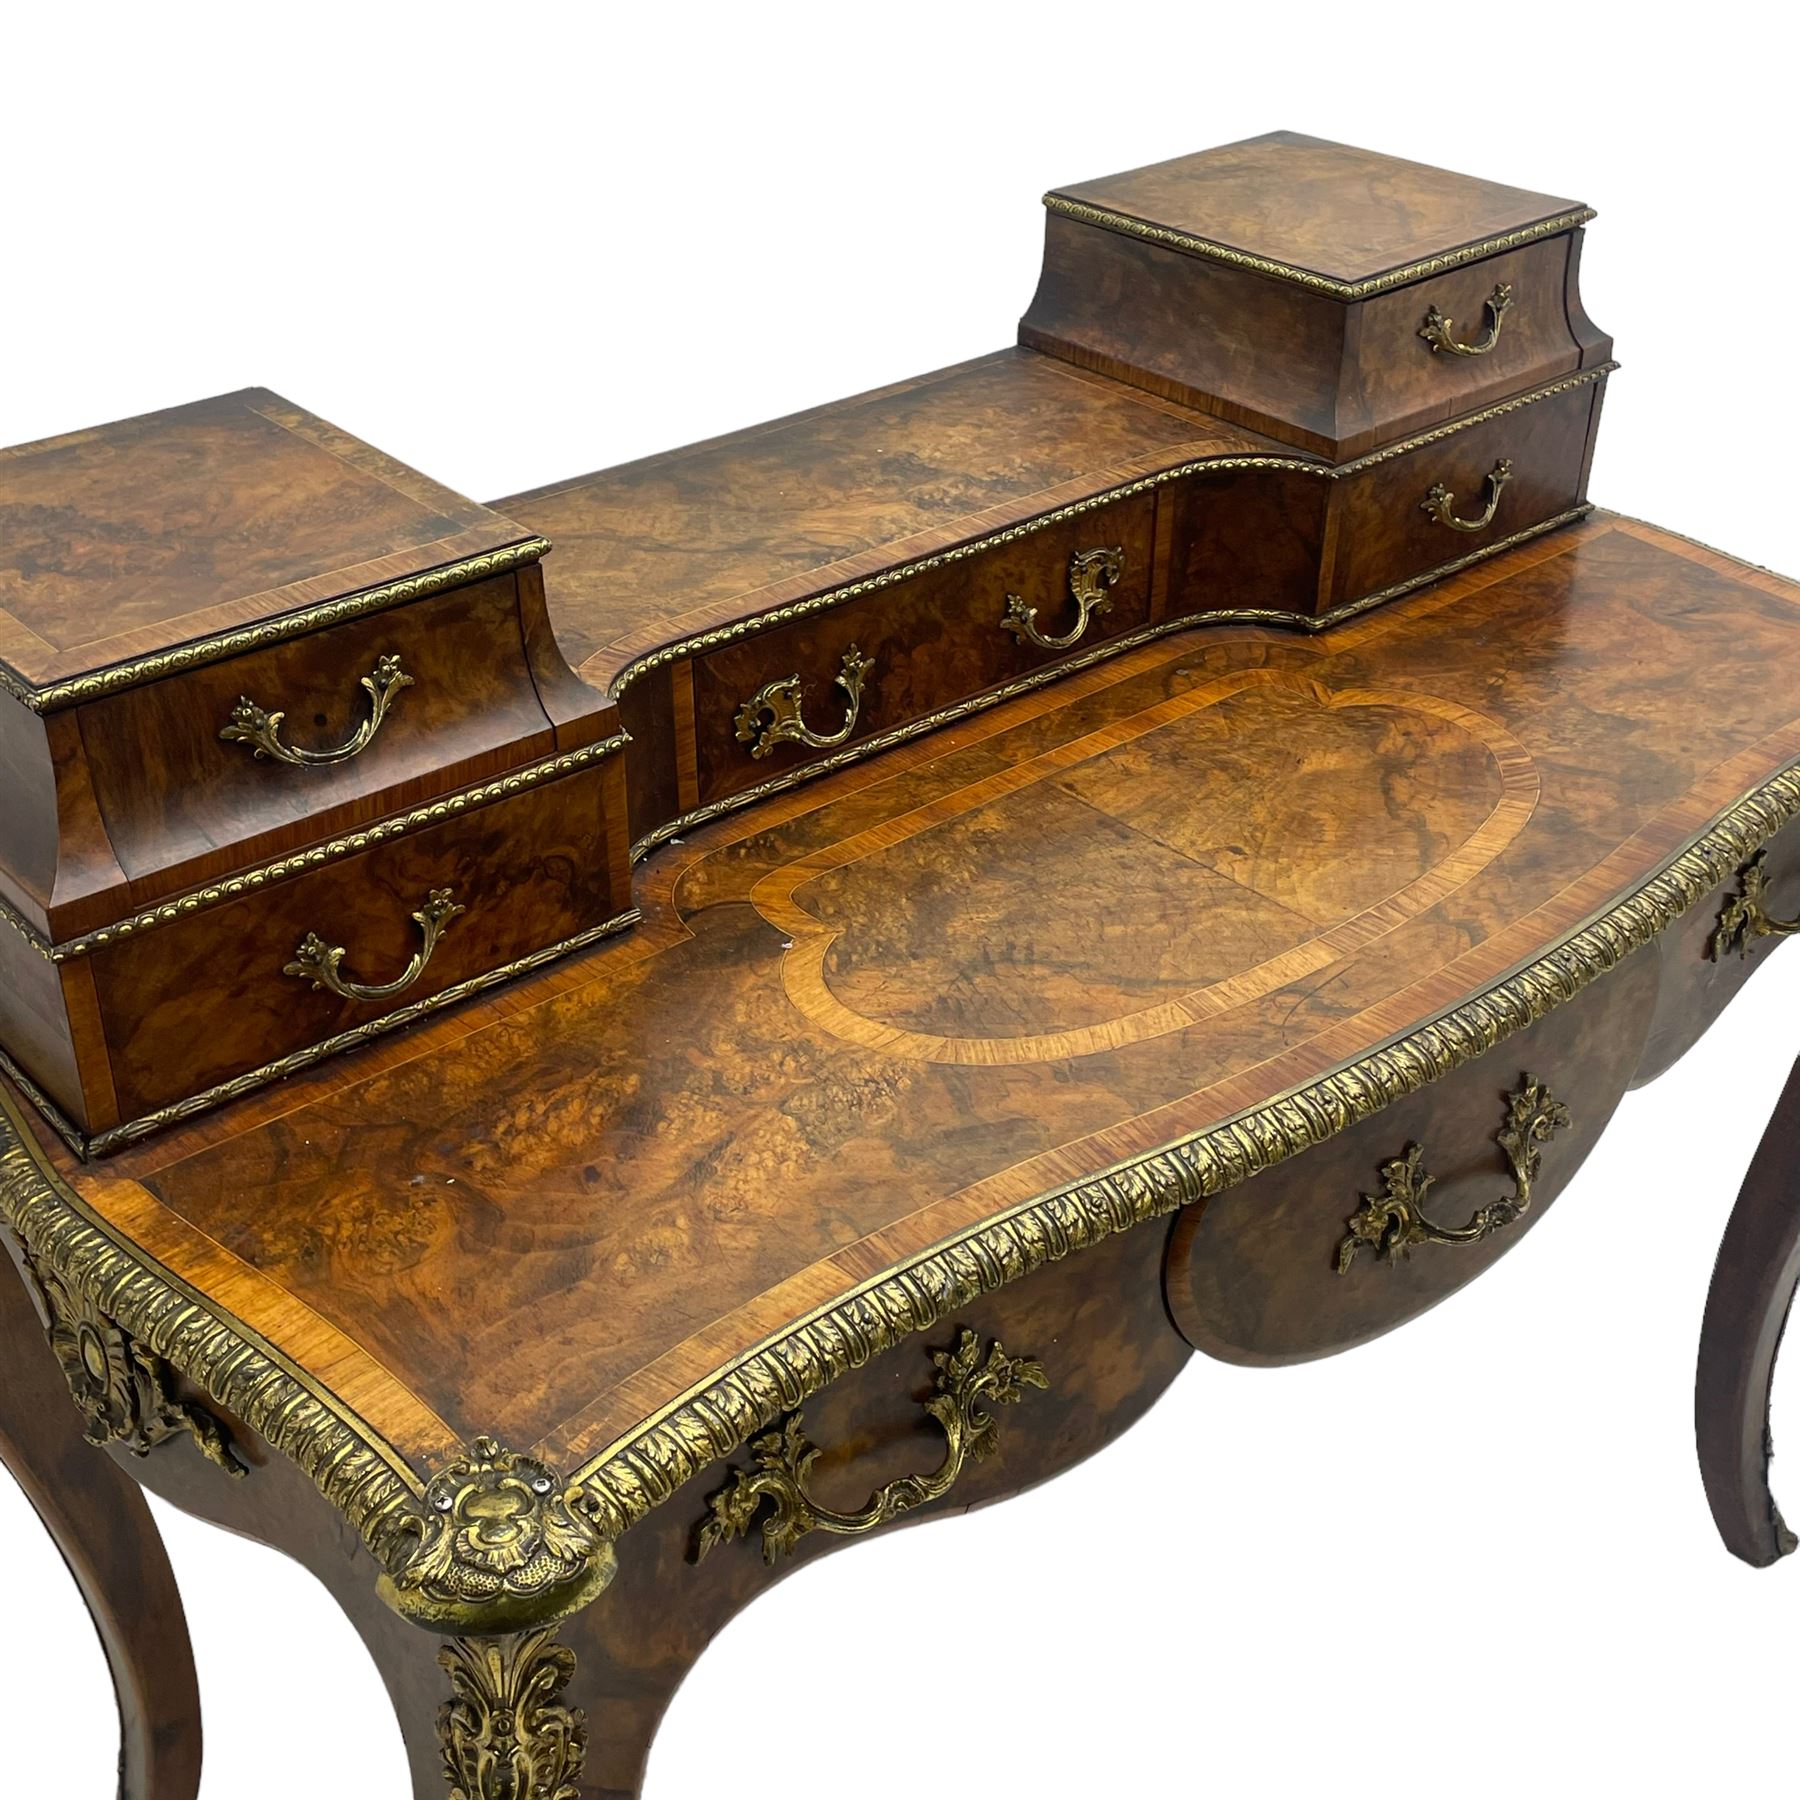 Late 19th to early 20th century French figured walnut writing desk - Image 12 of 13